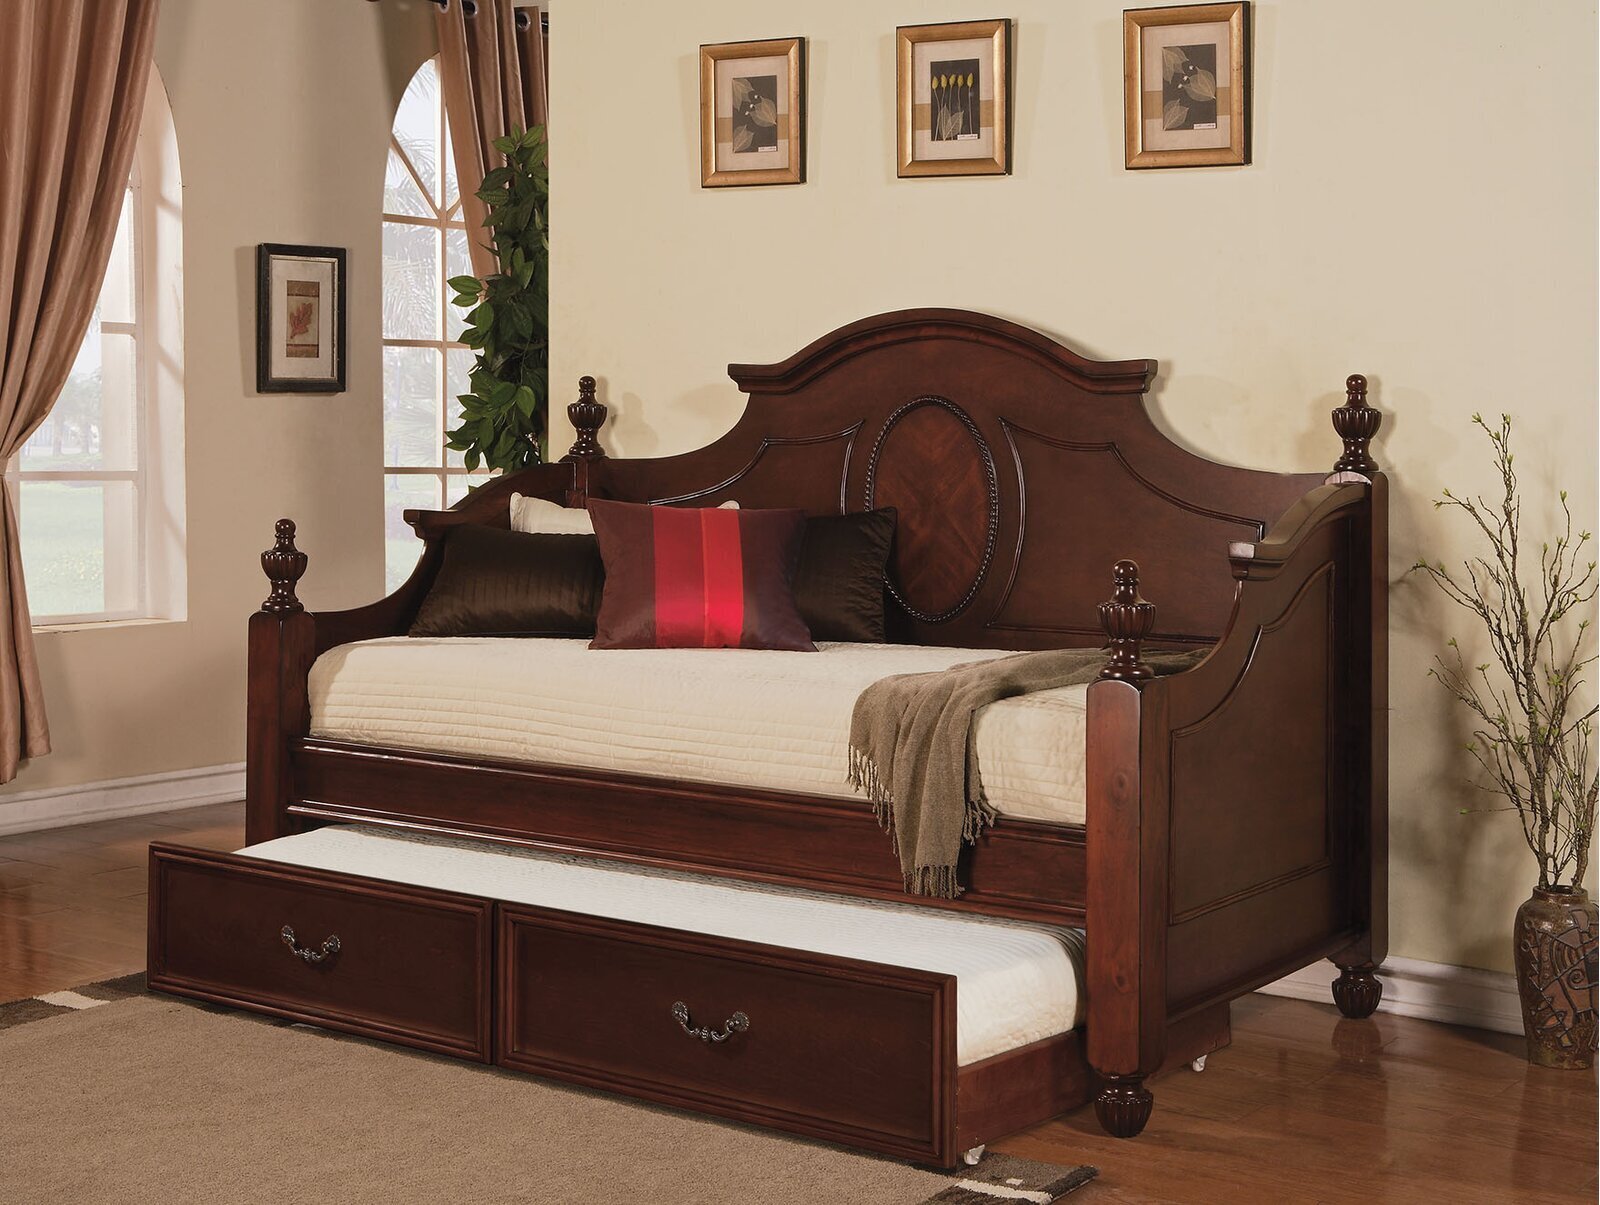 Carved Daybed